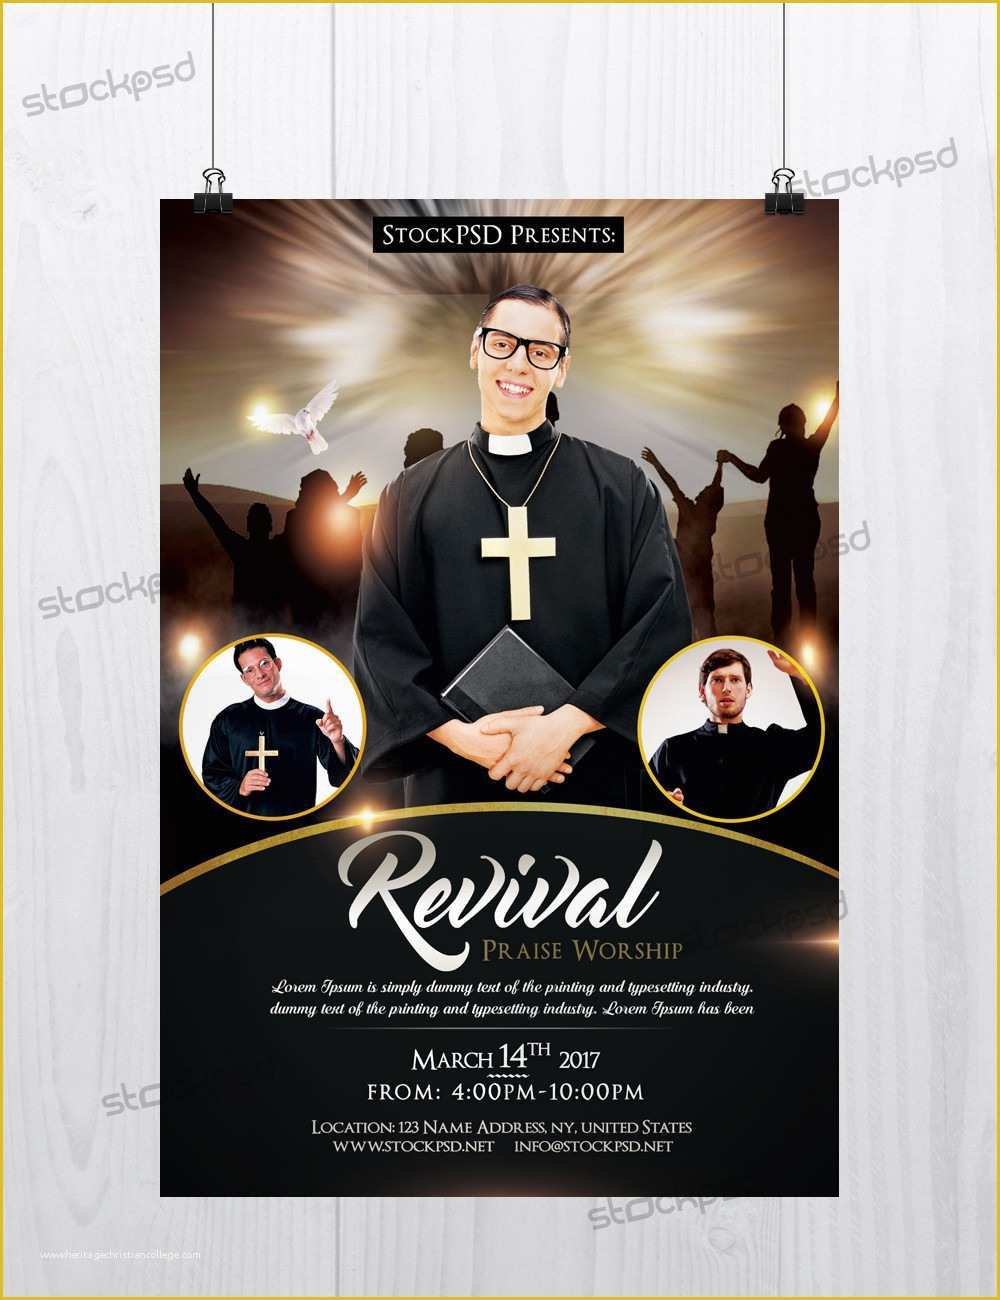 Free Church Revival Flyer Template Of Revival Church & Pastor Freebie Psd Flyer Template